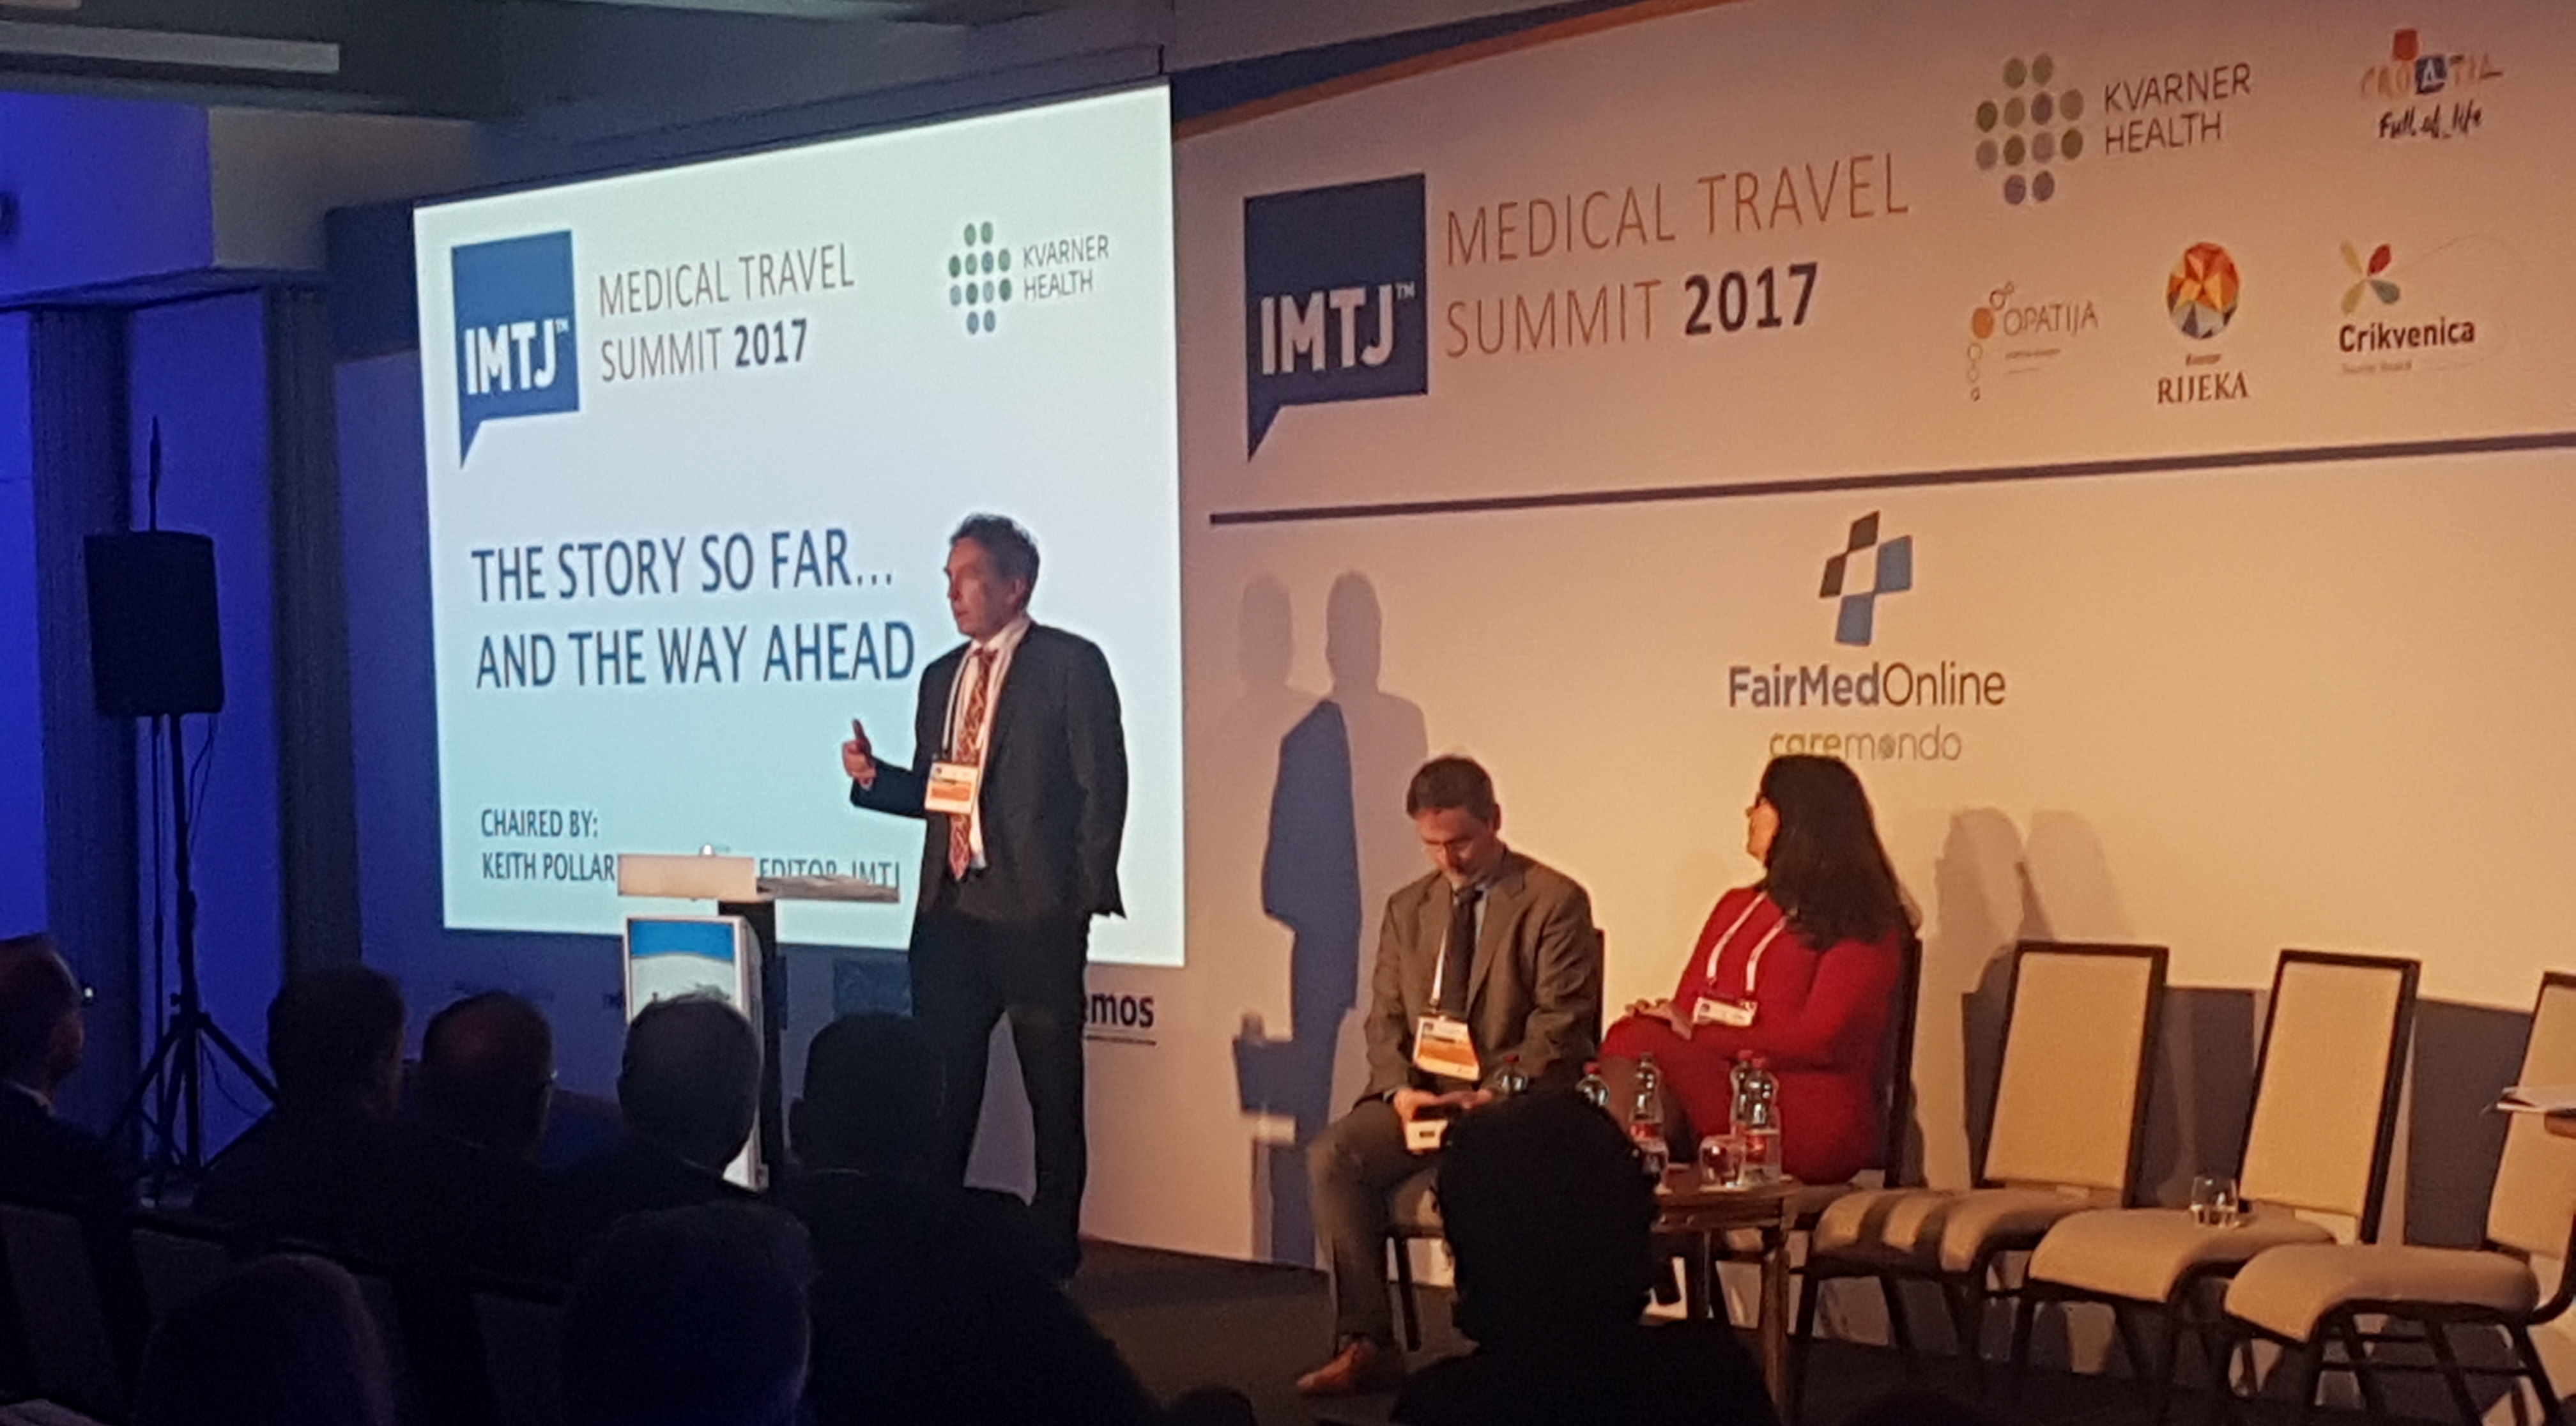 220 delegates from 35 countries debate the future of medical tourism